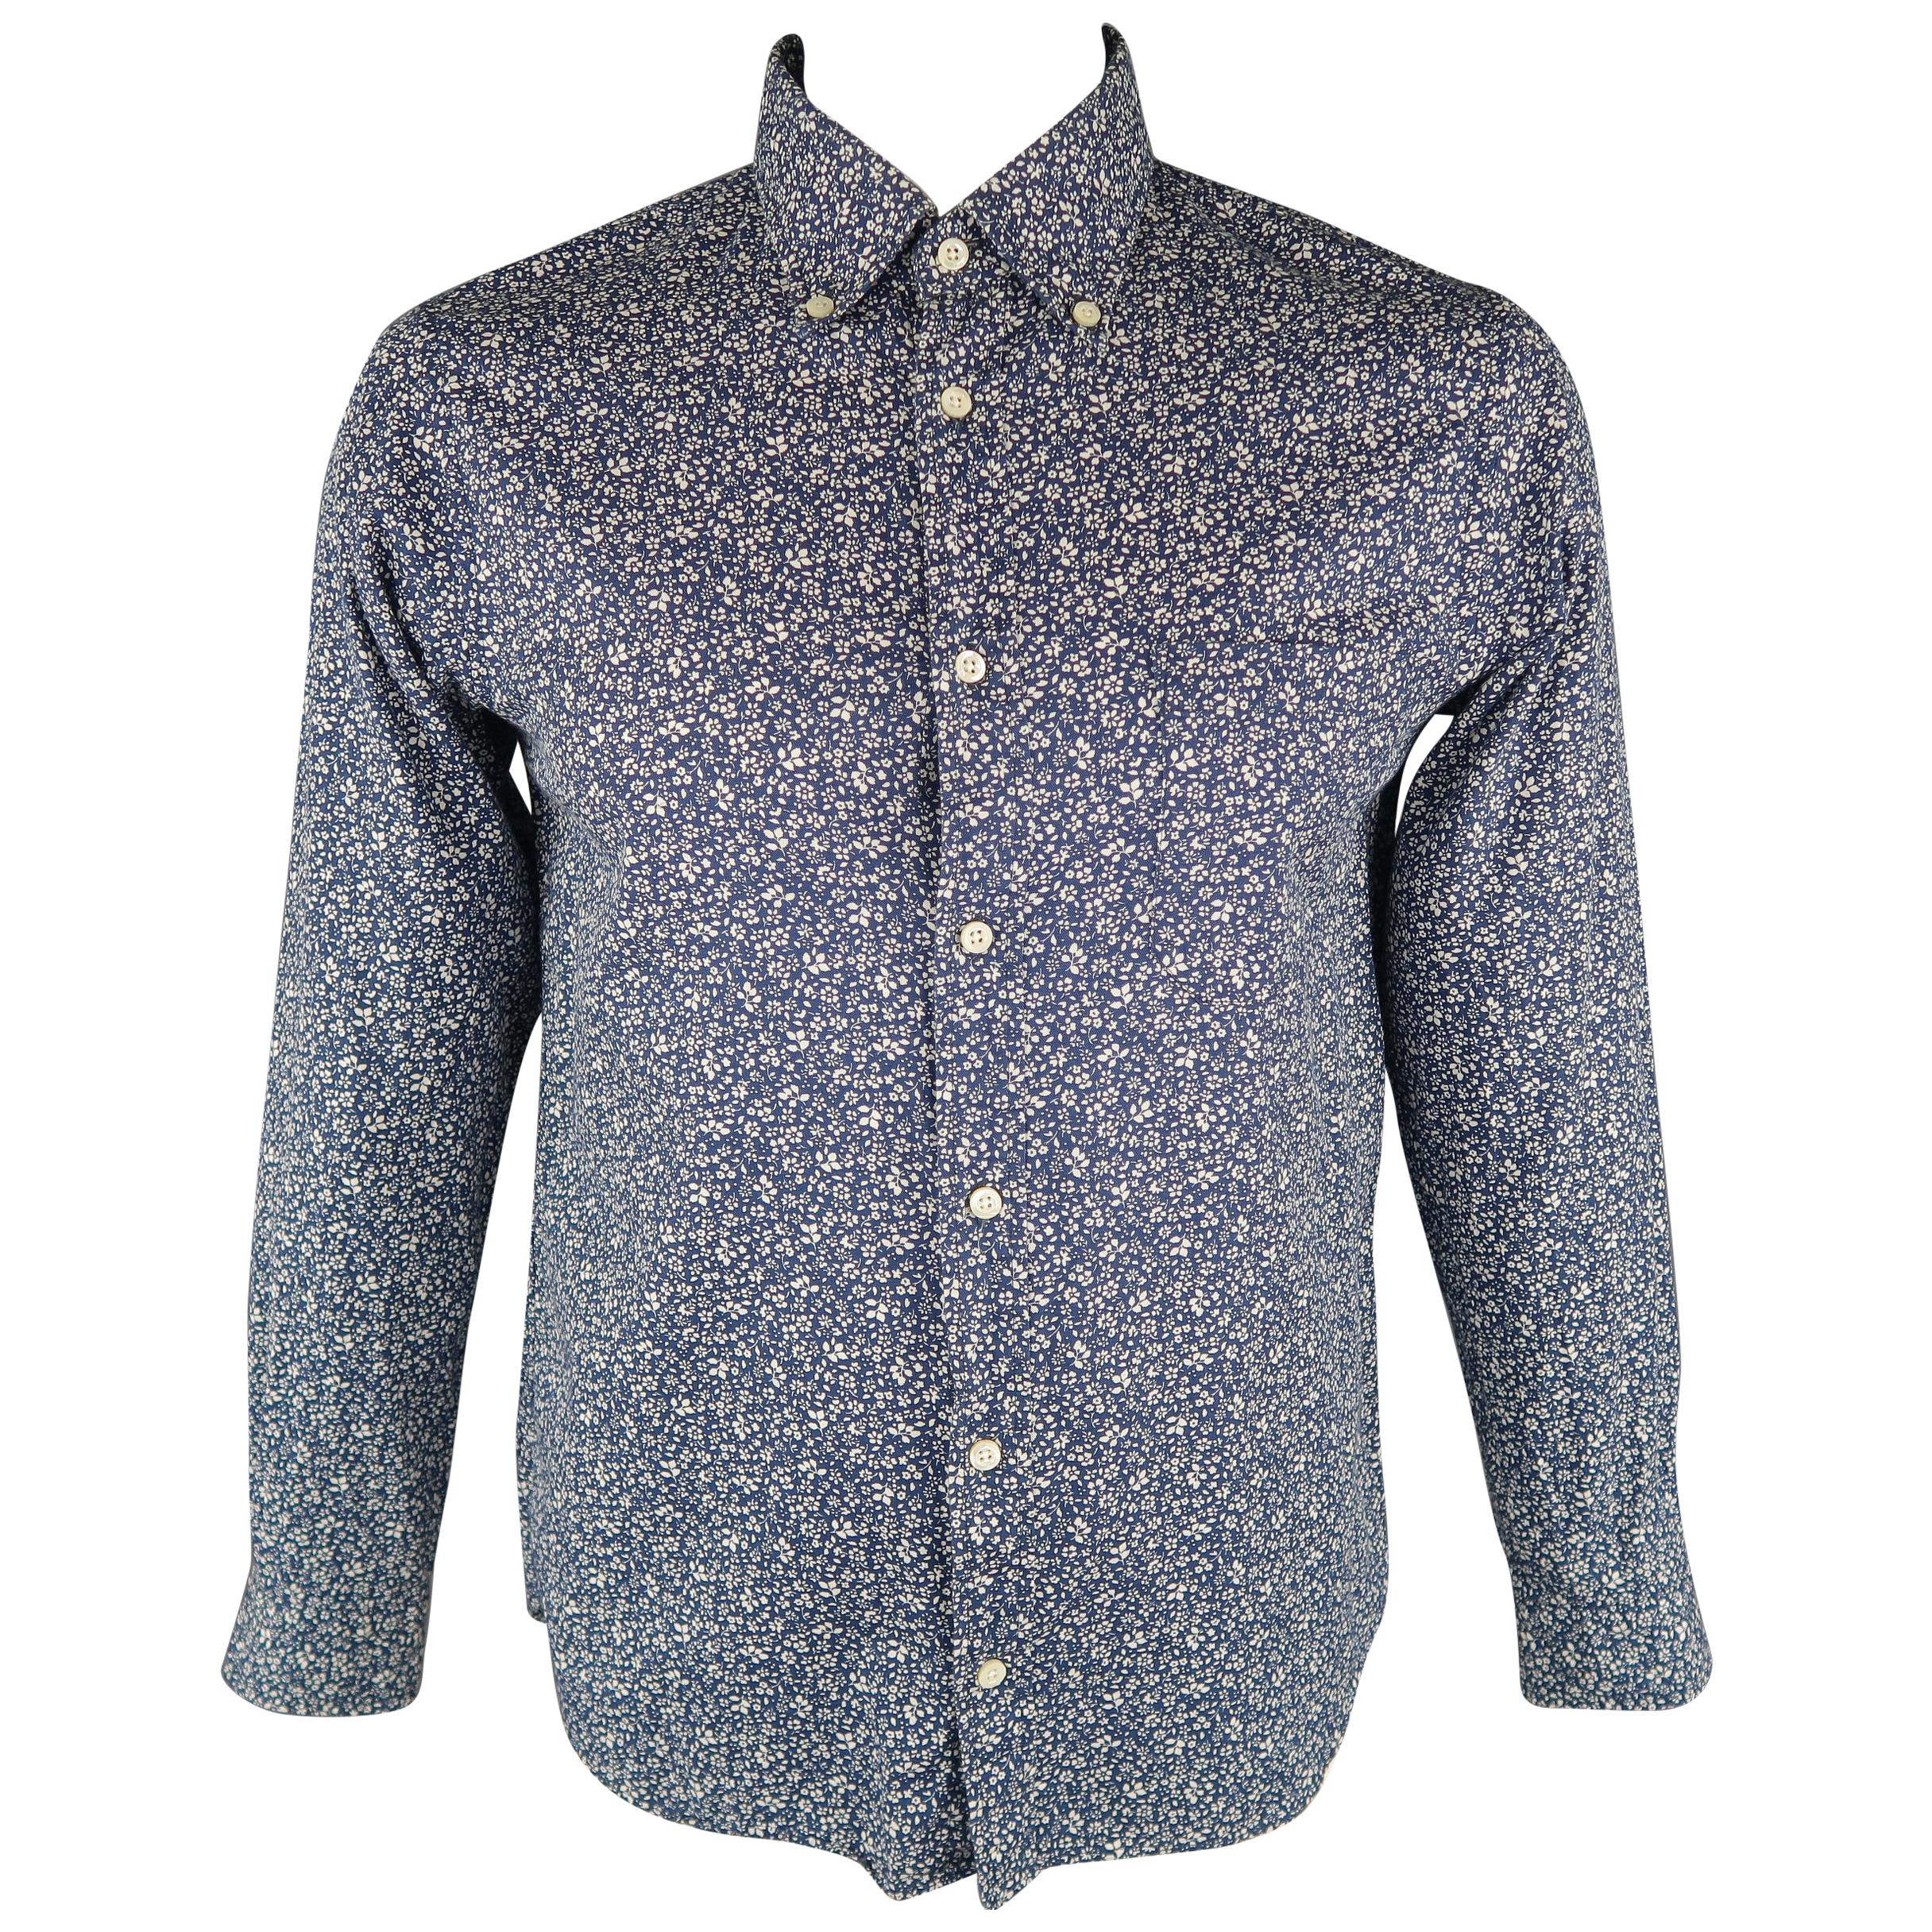 TS (S) Size L Navy Floral Cotton Long Sleeve Shirt